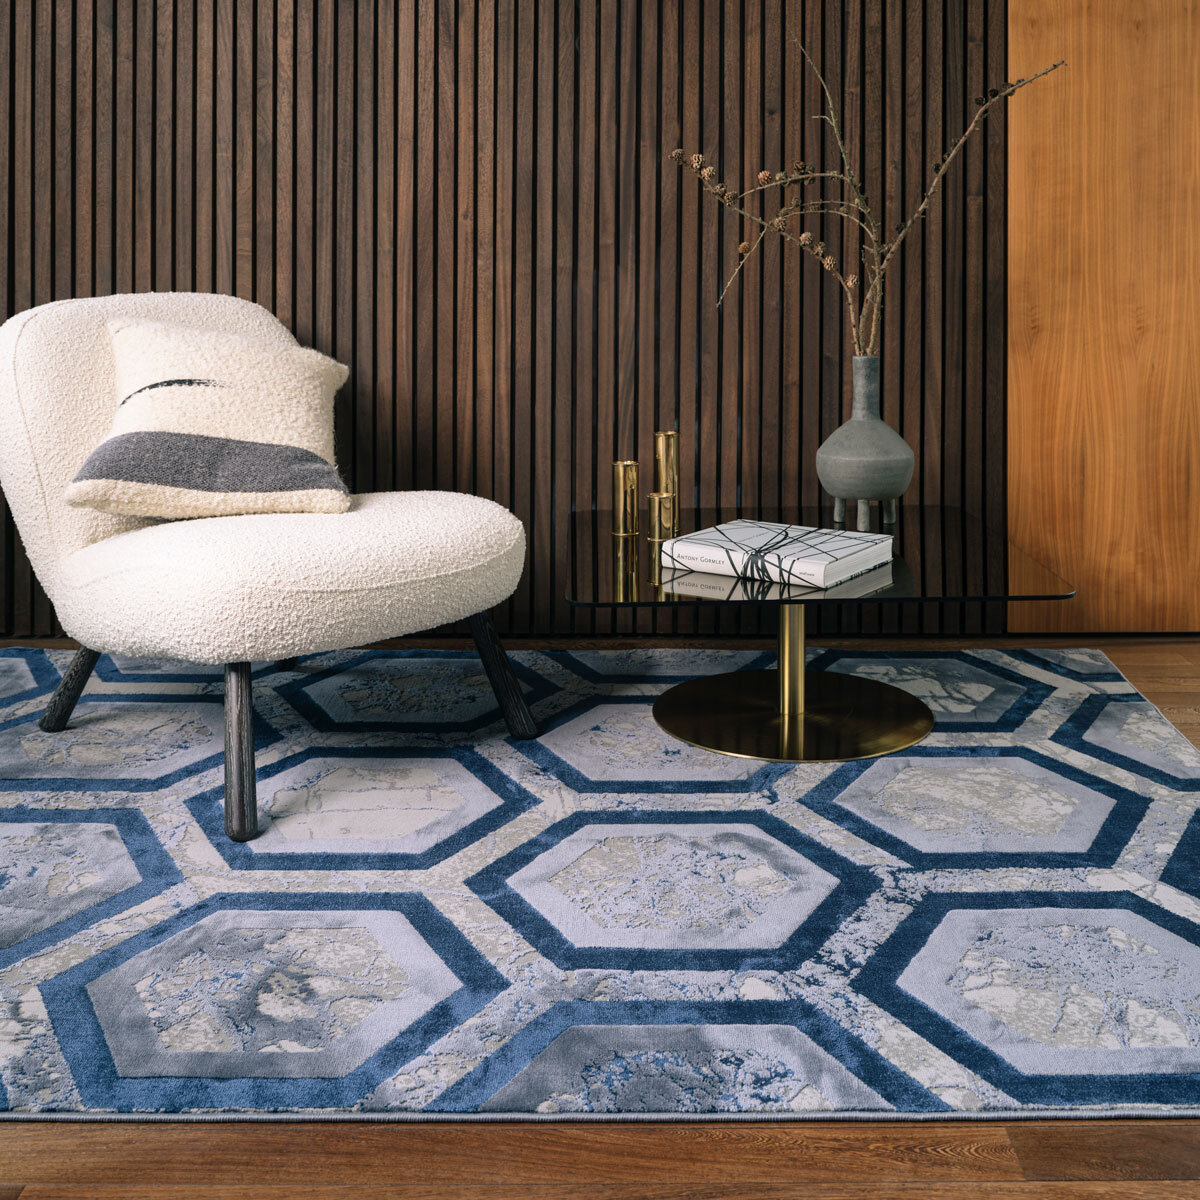 Asiatic Aurora Hexagon rug in a living room